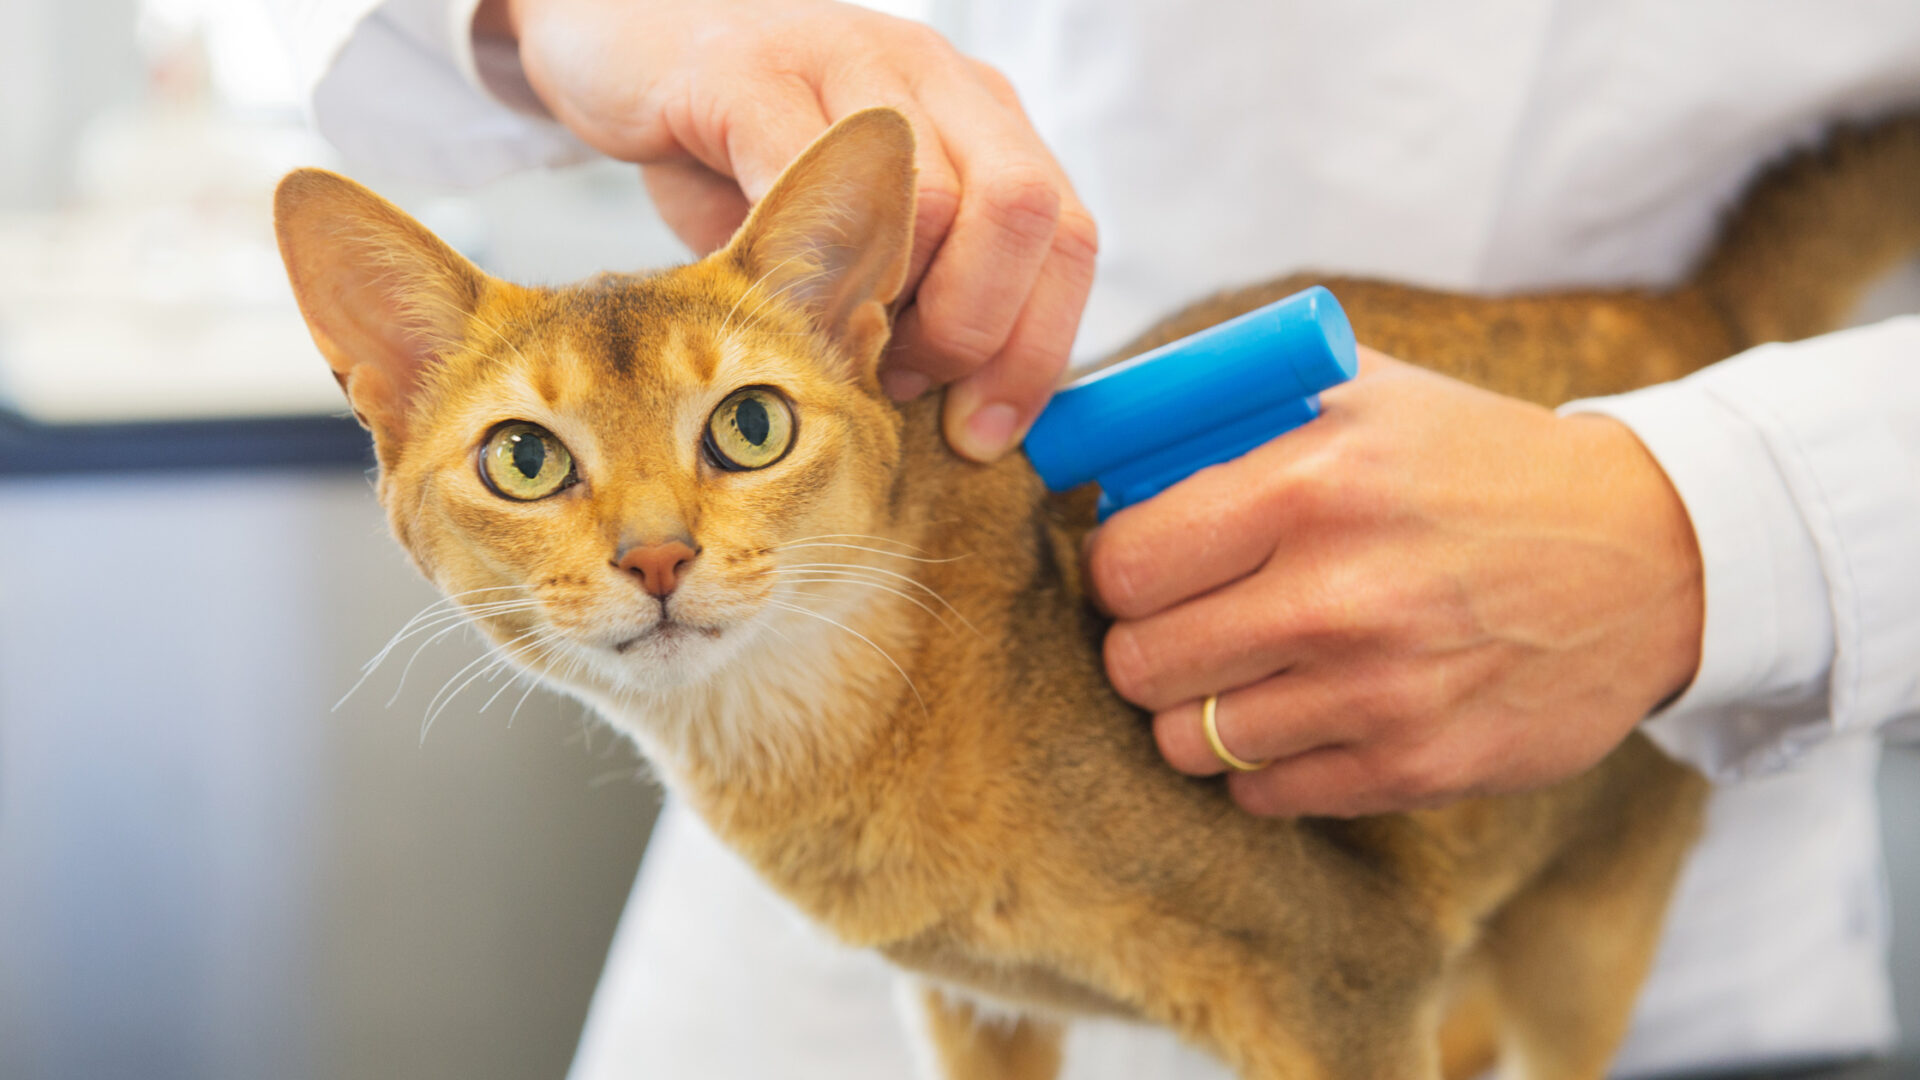 A small cat getting microchipped by a veterinarian in preparation for international travel